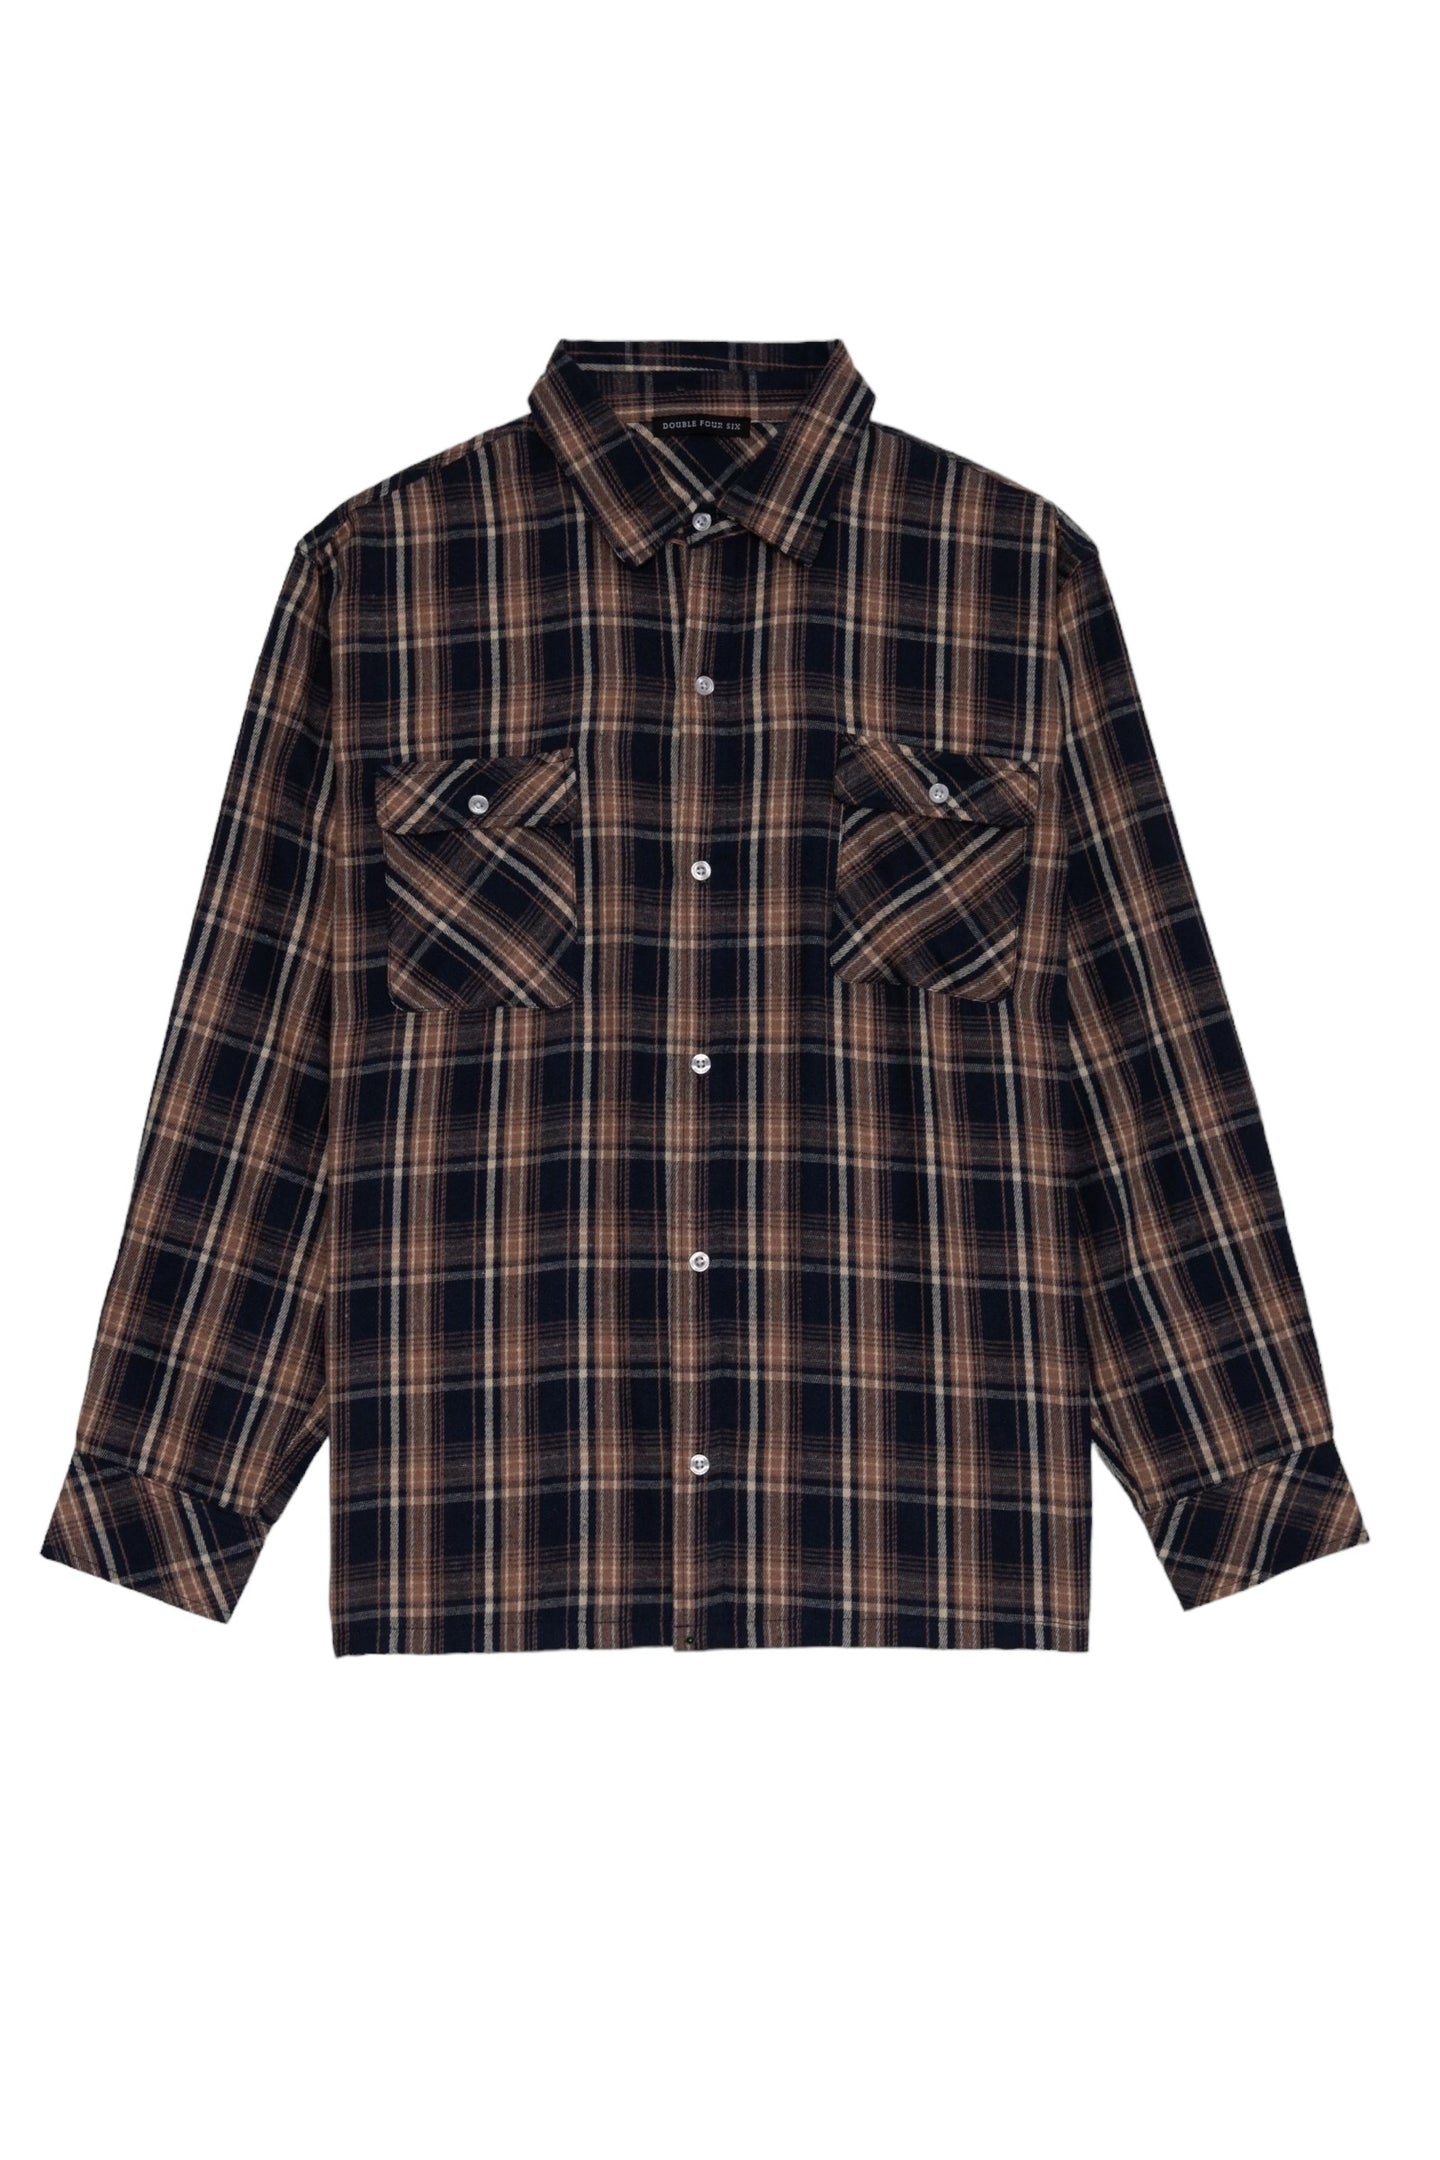 DOUBLE FOUR SIX- Back Logo Checked Shirt Navy Check